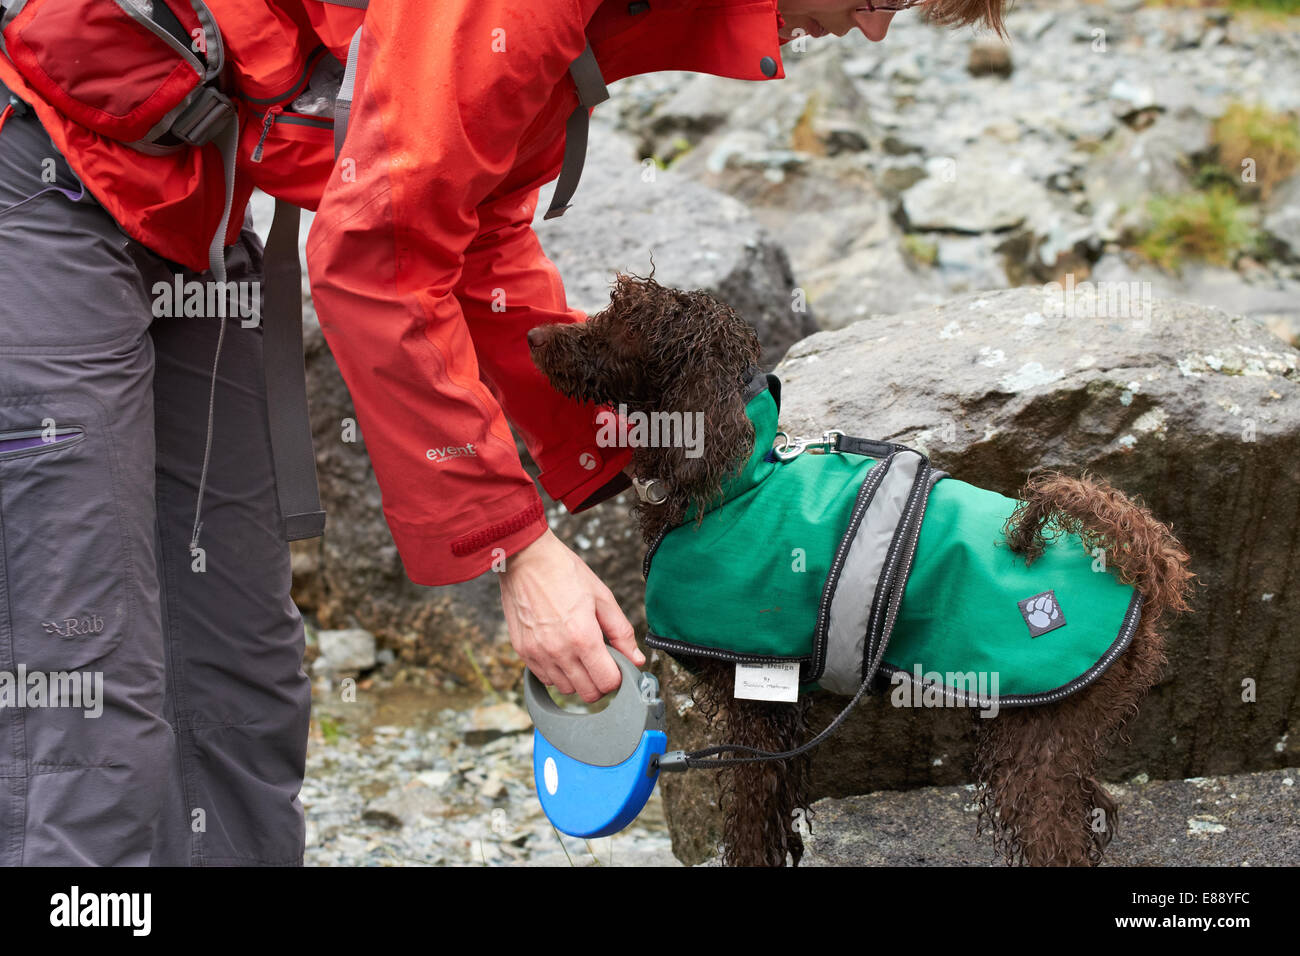 A hiker putting on a waterproof jacket on their dog while out for a walk in the mountains. Stock Photo